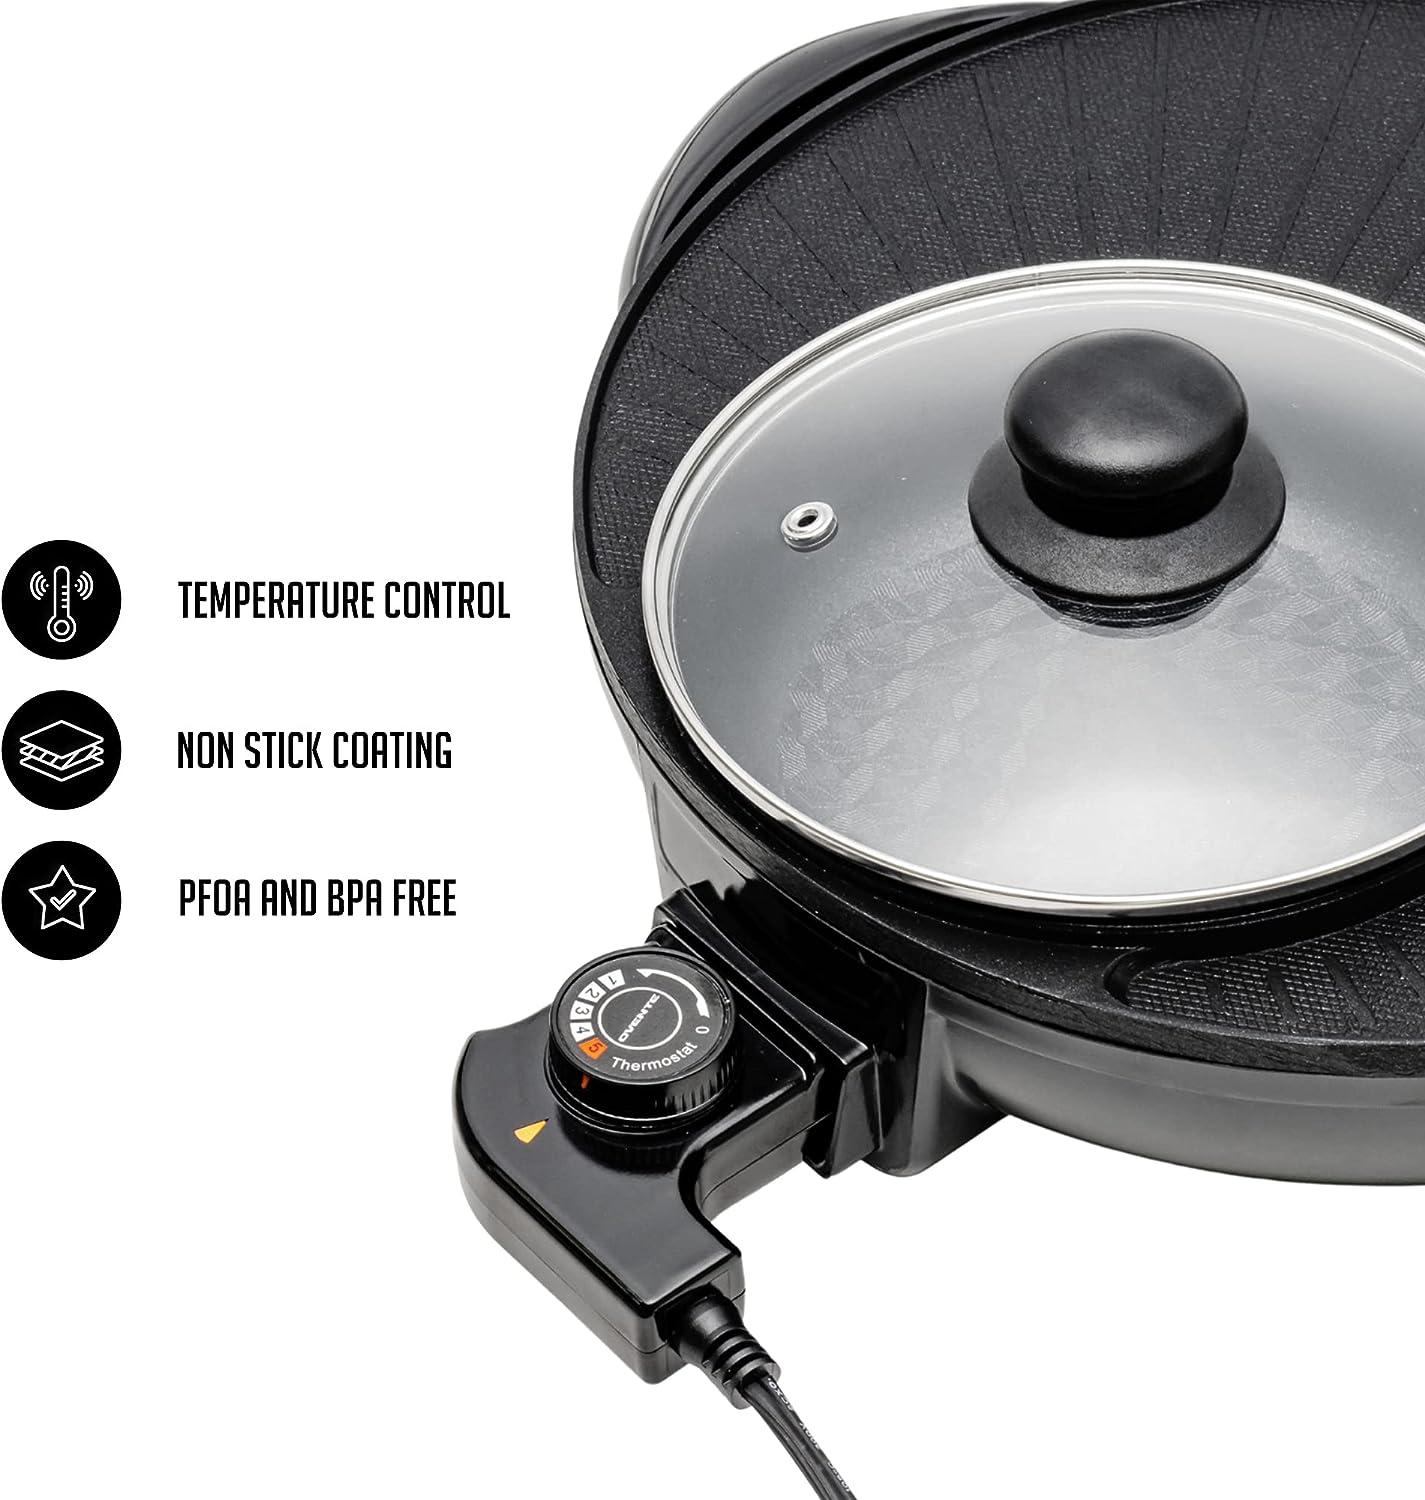 OVENTE Electric Hot Pot and Grill Combo with Temperature Control